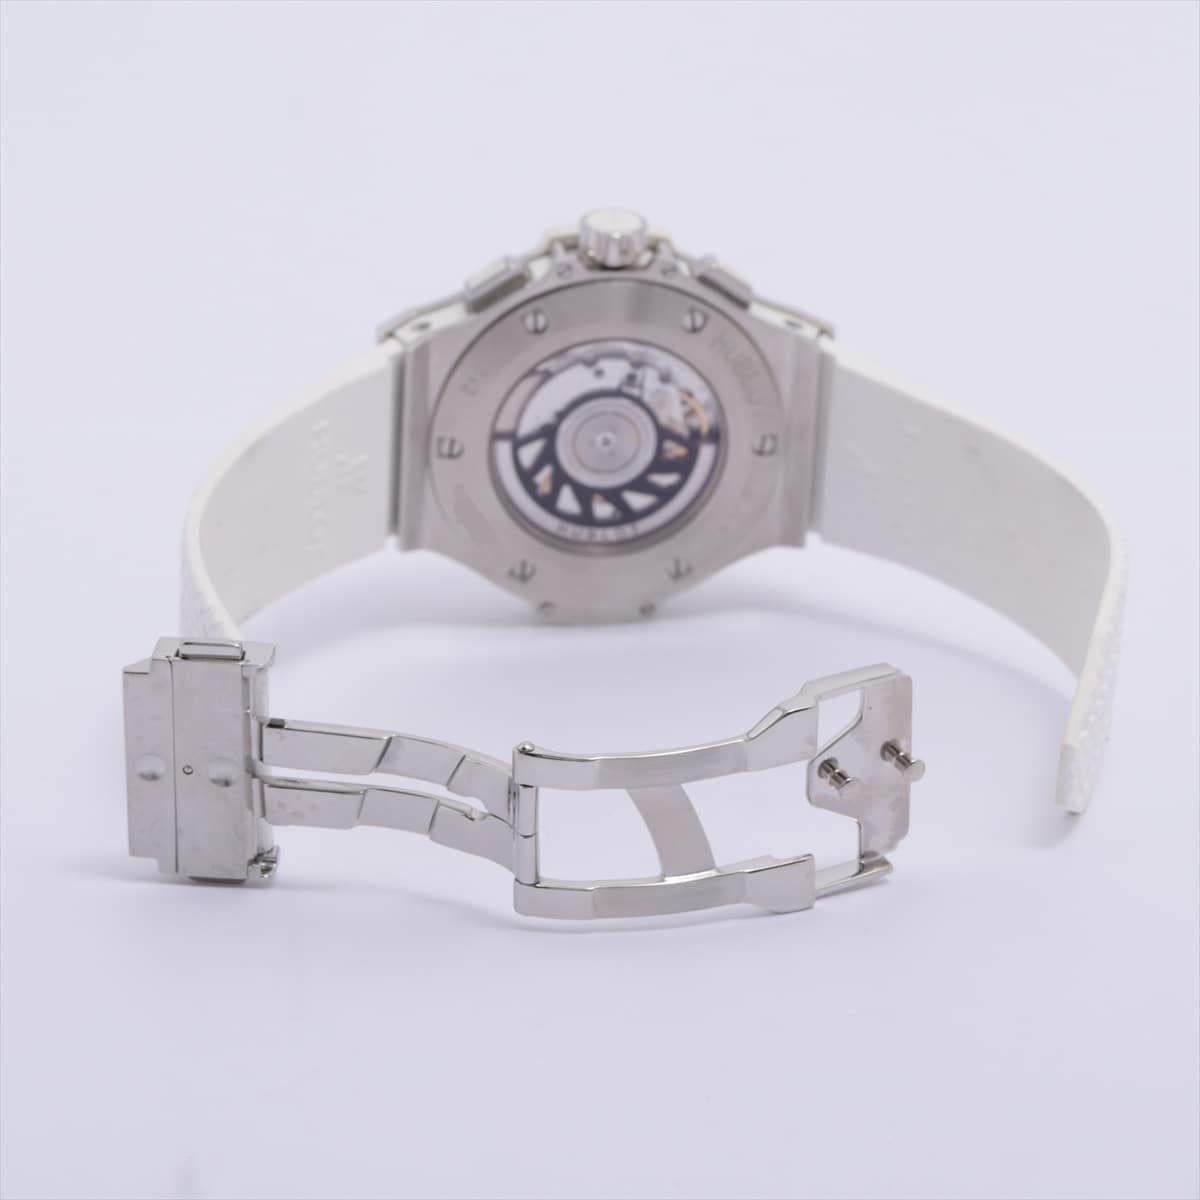 Hublot Big bang 342.SE.230.RW.114 SS & rubber AT White-Face Watch strap with a scent of perfume